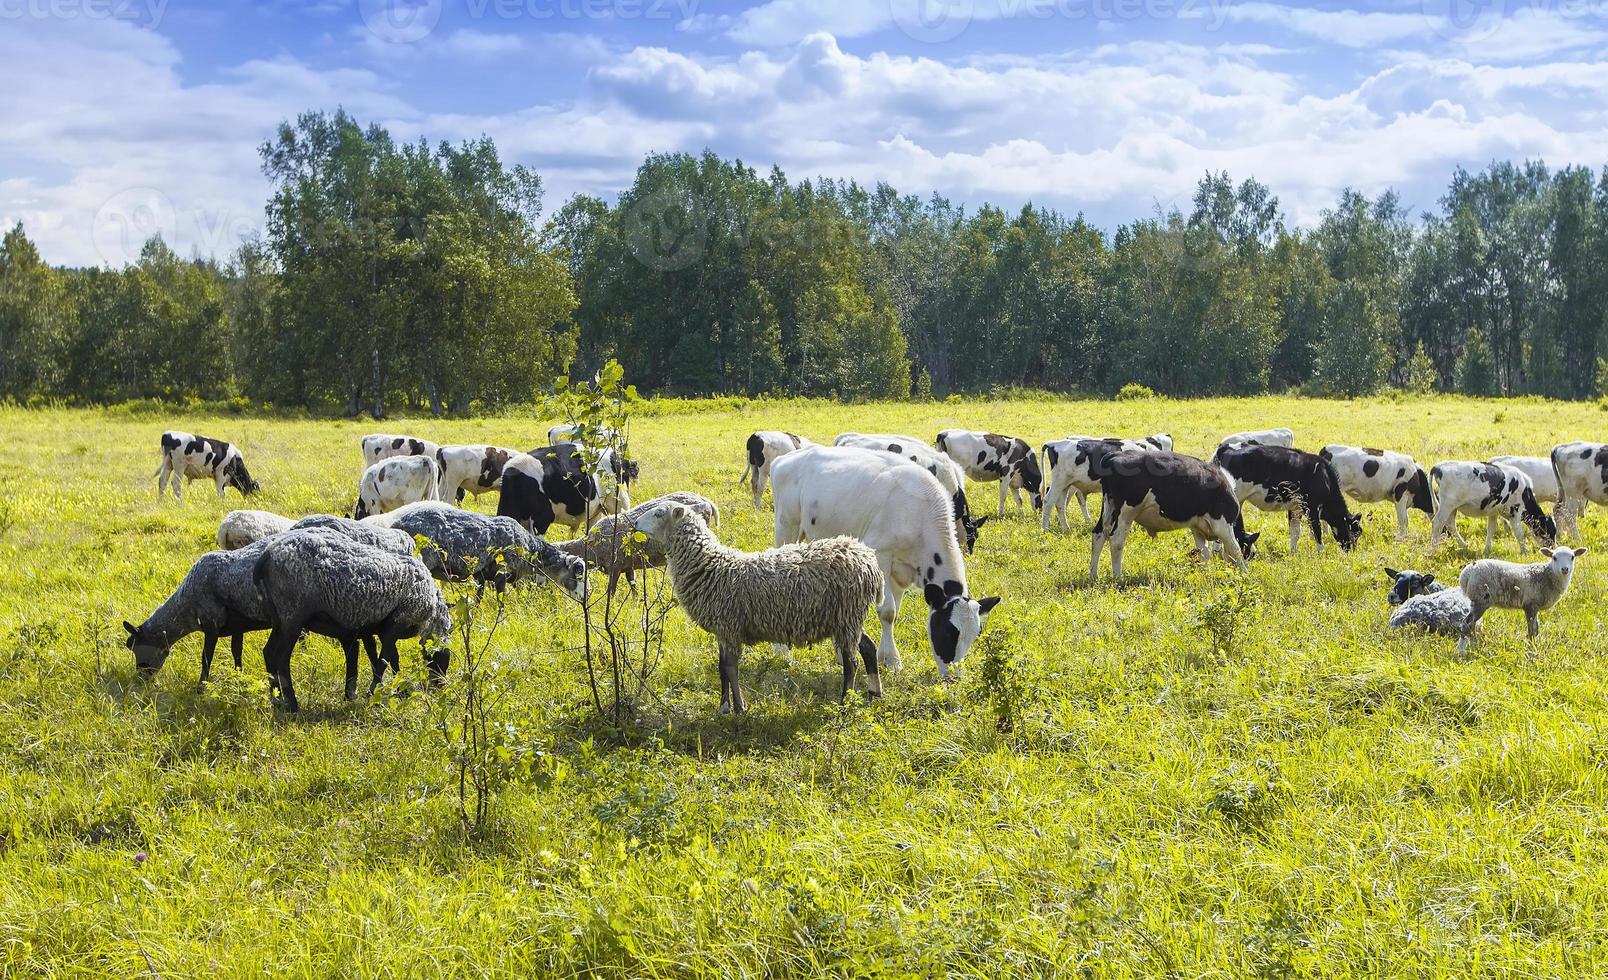 The flock of sheep and cows pasturing on green and yellow grass in a sunny day photo